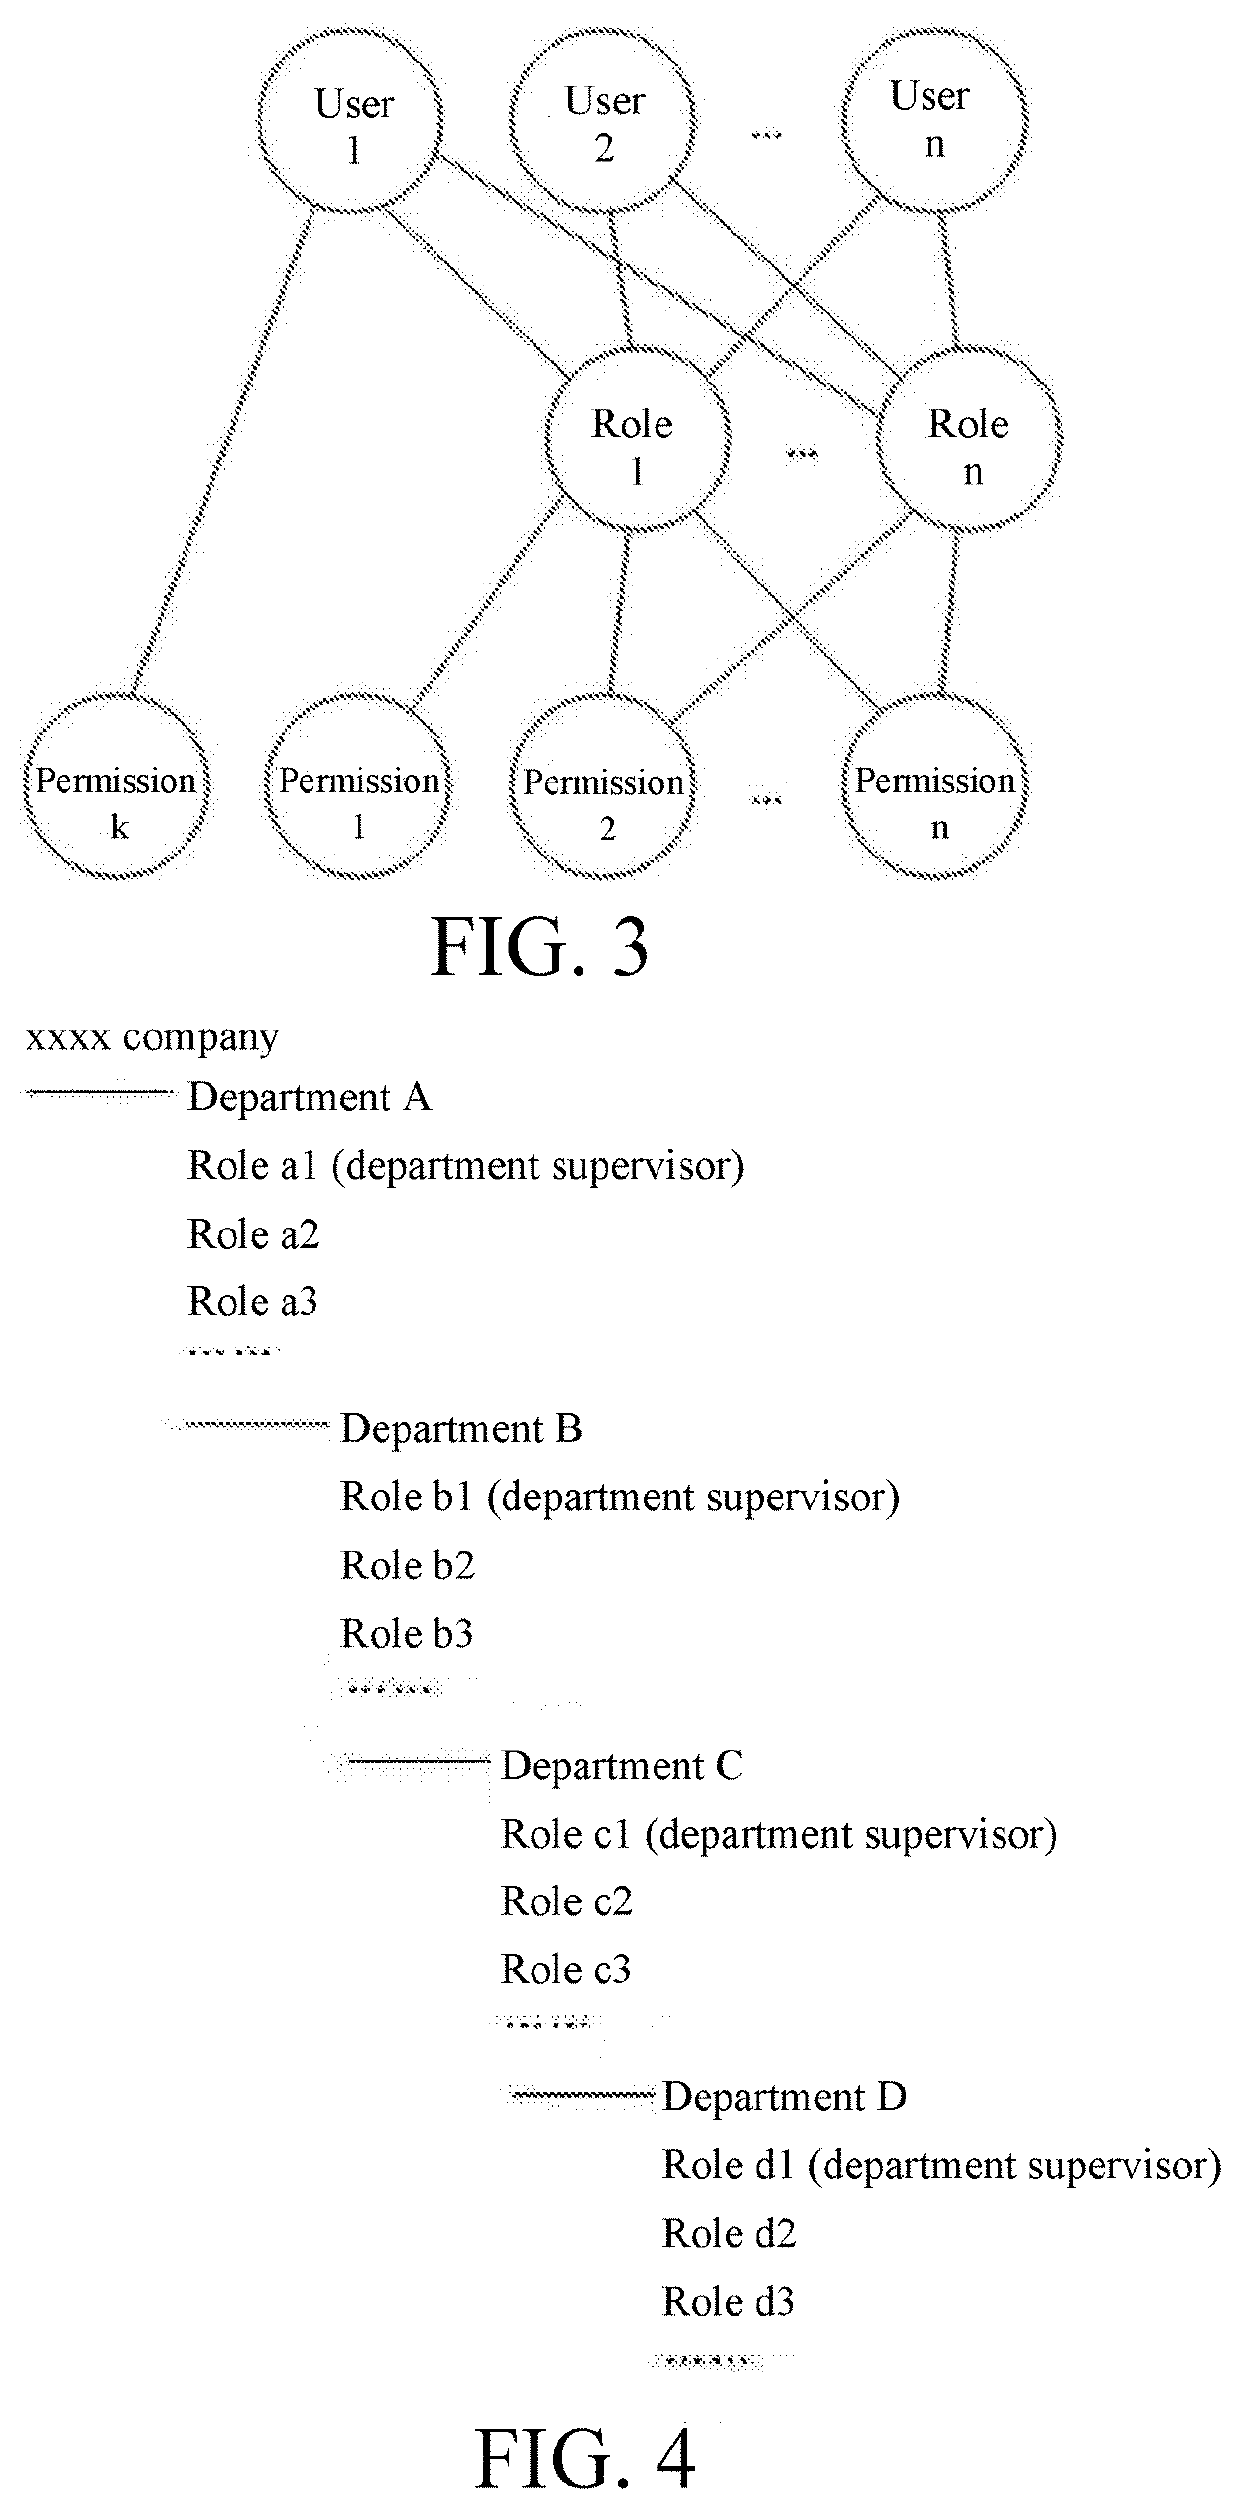 Method based on form fields for arranging examination and approval roles at workflow examination and approval nodes